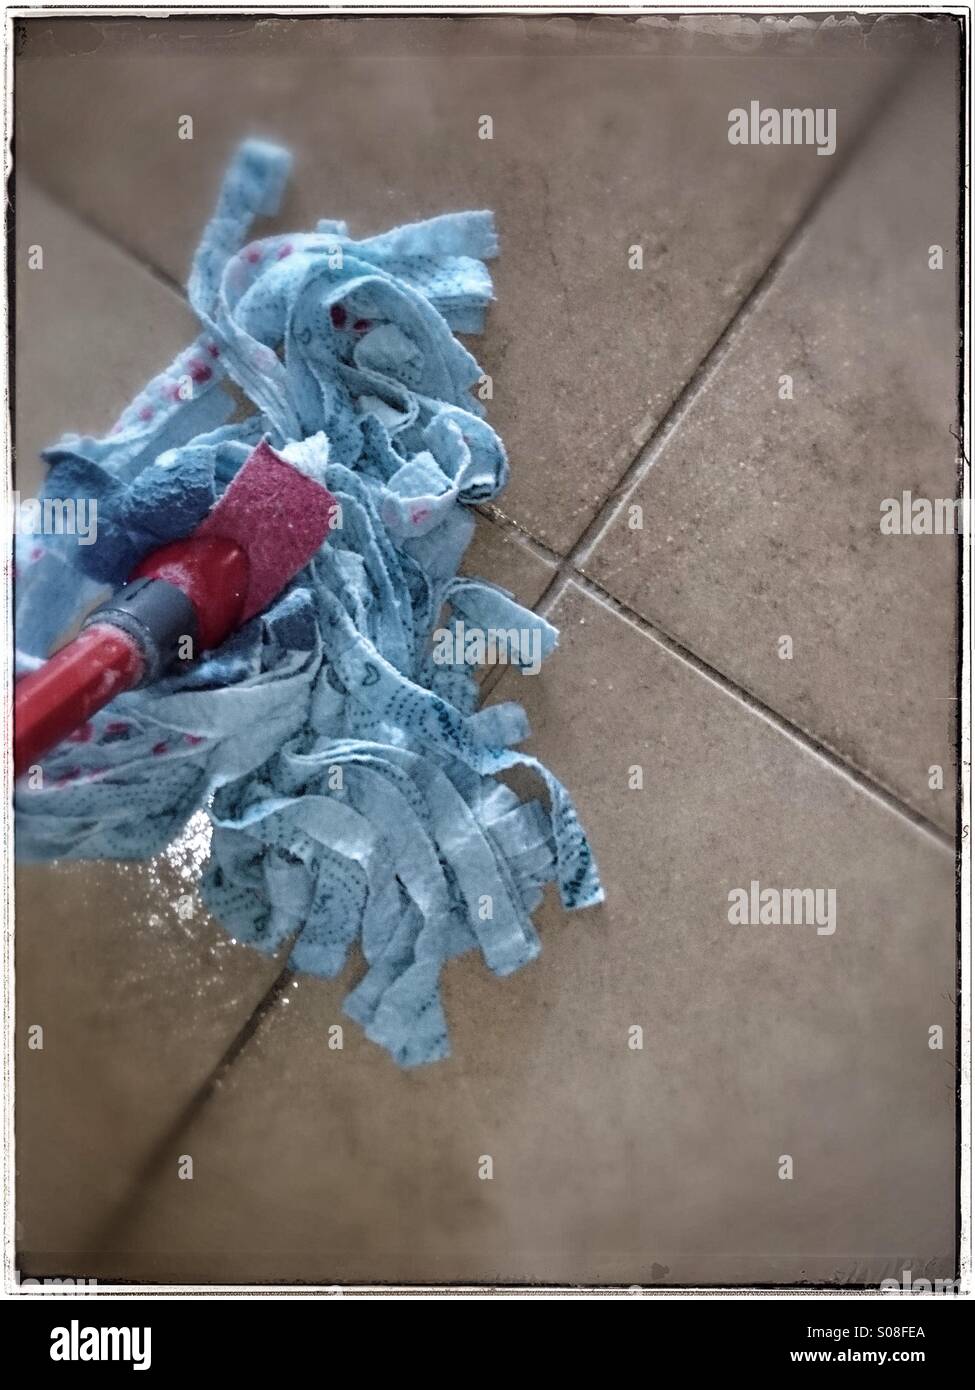 Mopping dirty floor Stock Photo